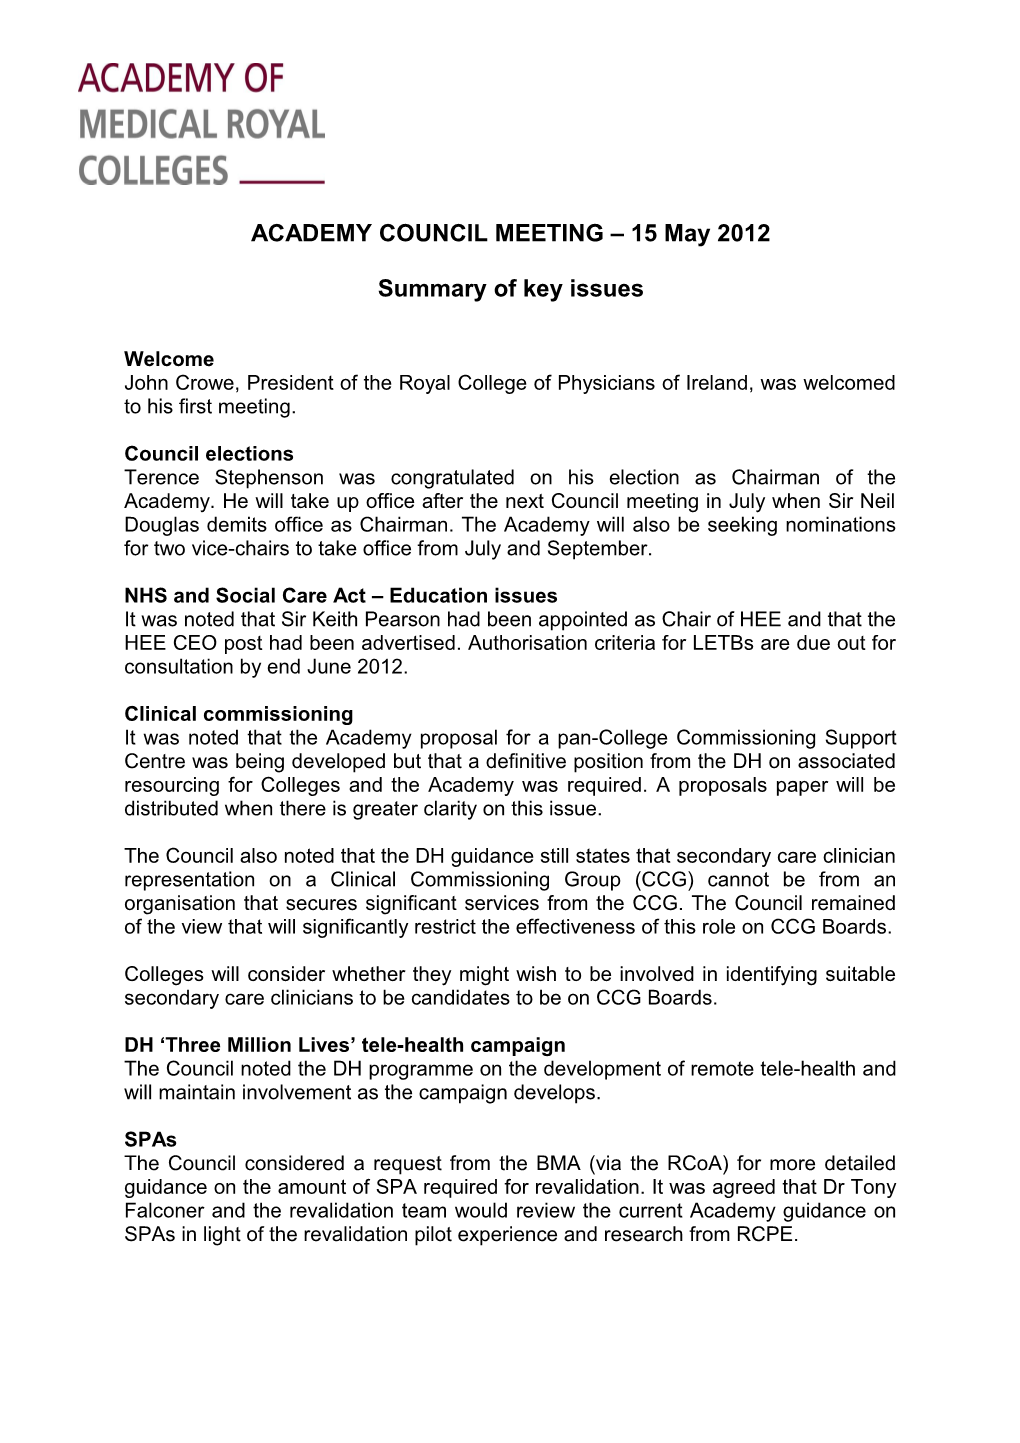 ACADEMY COUNCIL MEETING 15 May 2012